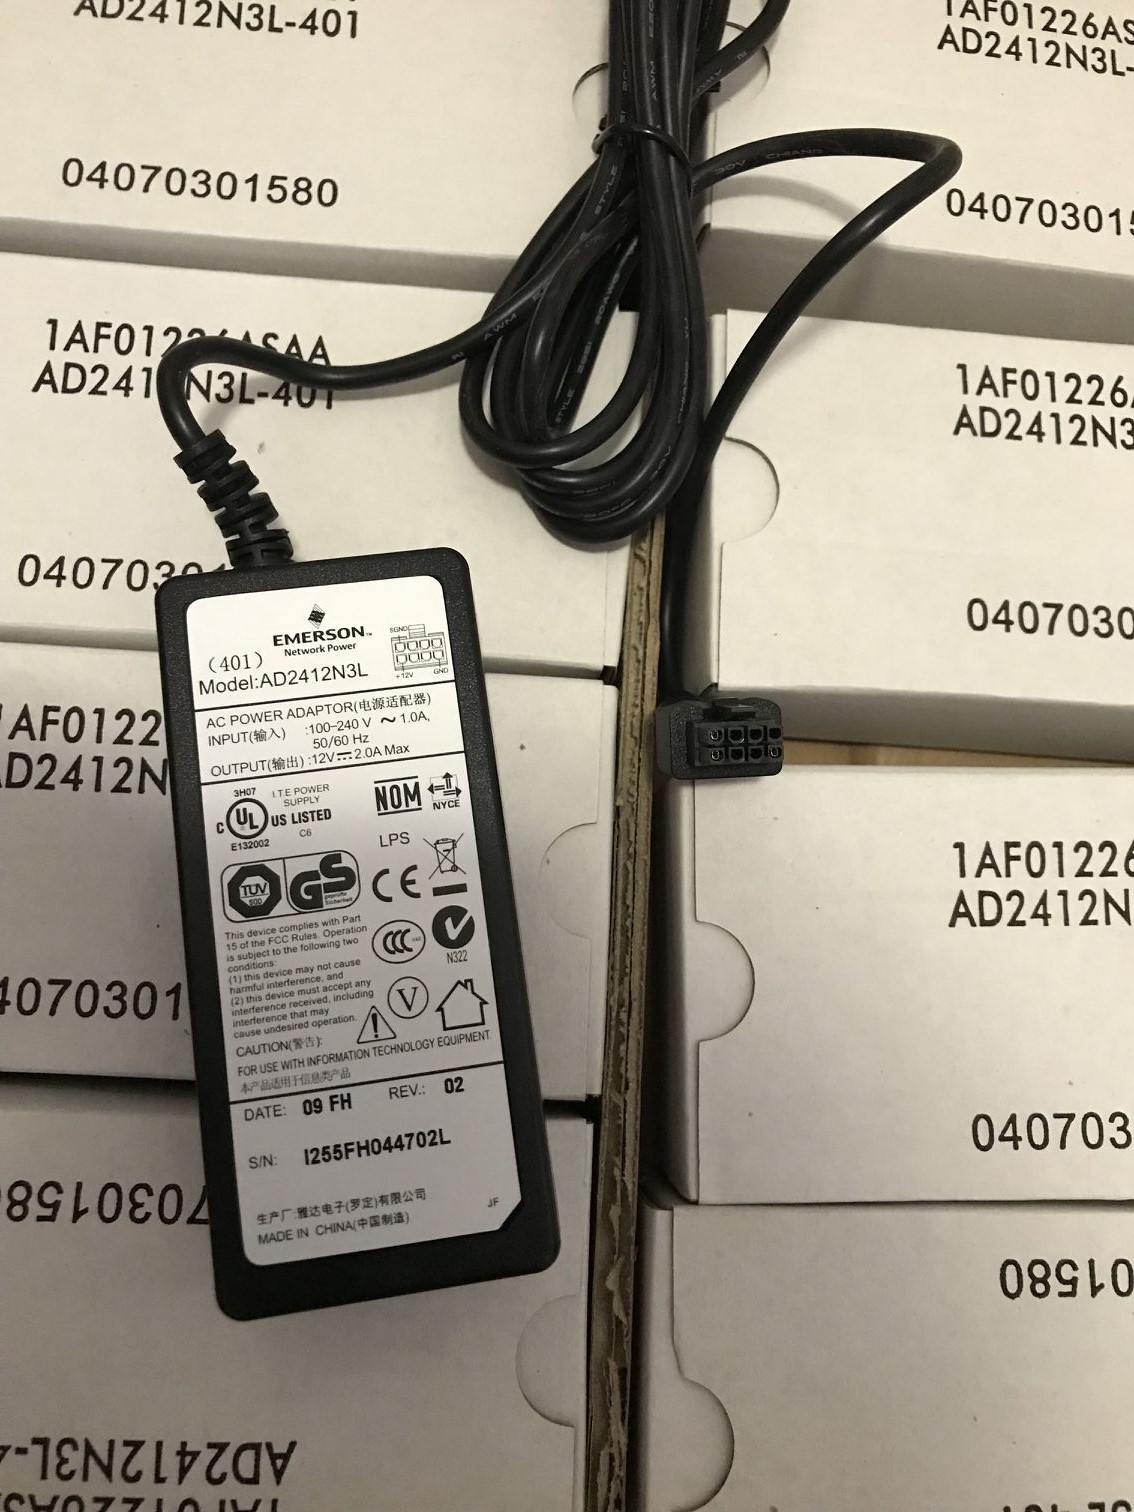 *NEW*EMERSON AD2412N3L 12V 2.0A AC DC Adapter POWER SUPPLY - Click Image to Close